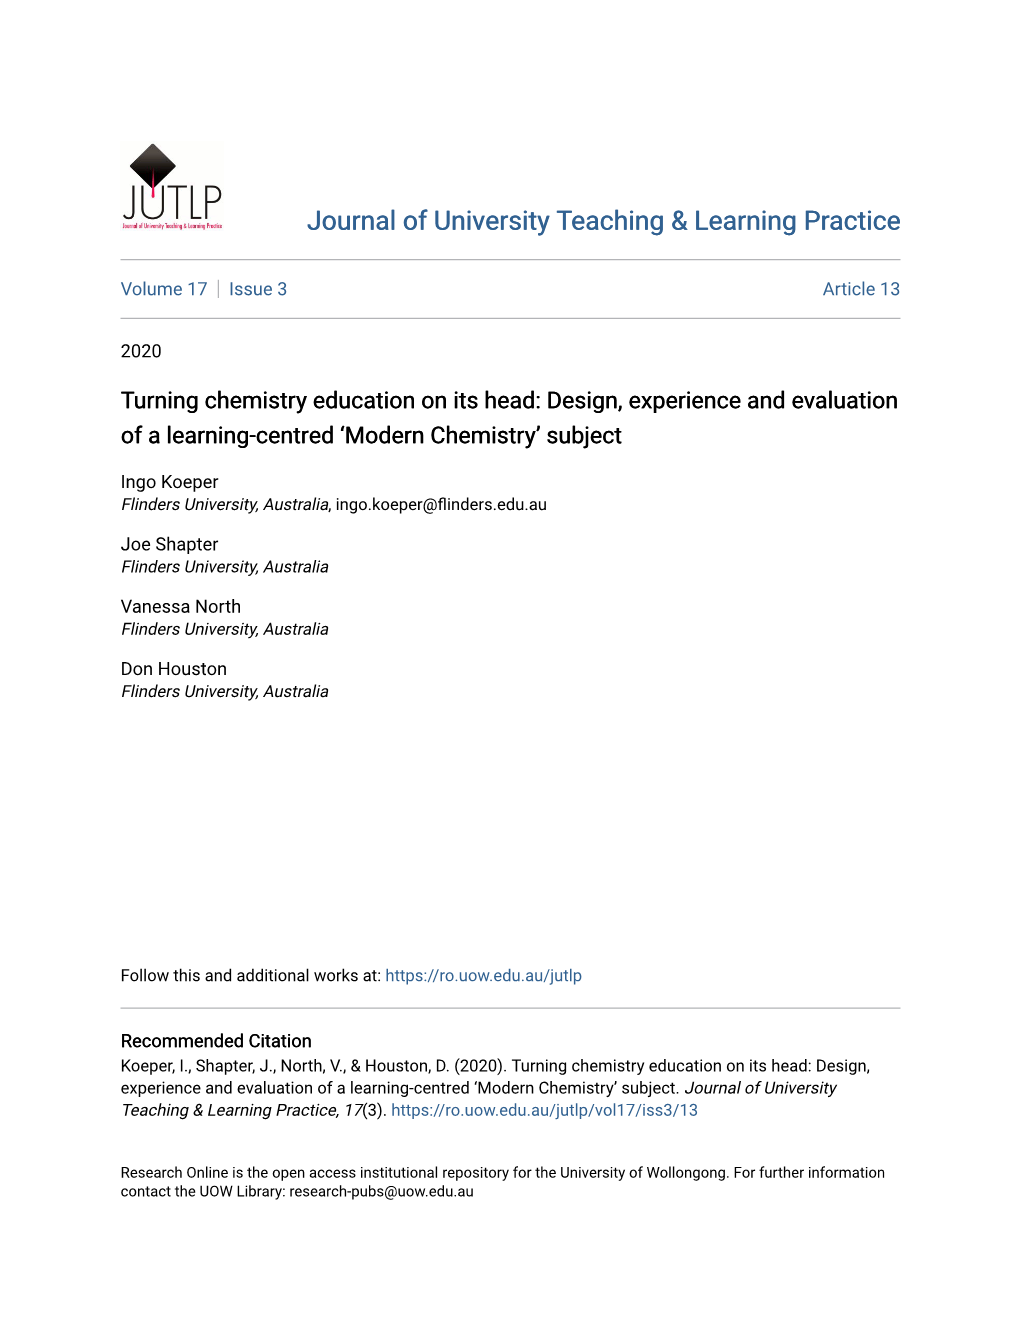 Turning Chemistry Education on Its Head: Design, Experience and Evaluation of a Learning-Centred ‘Modern Chemistry’ Subject